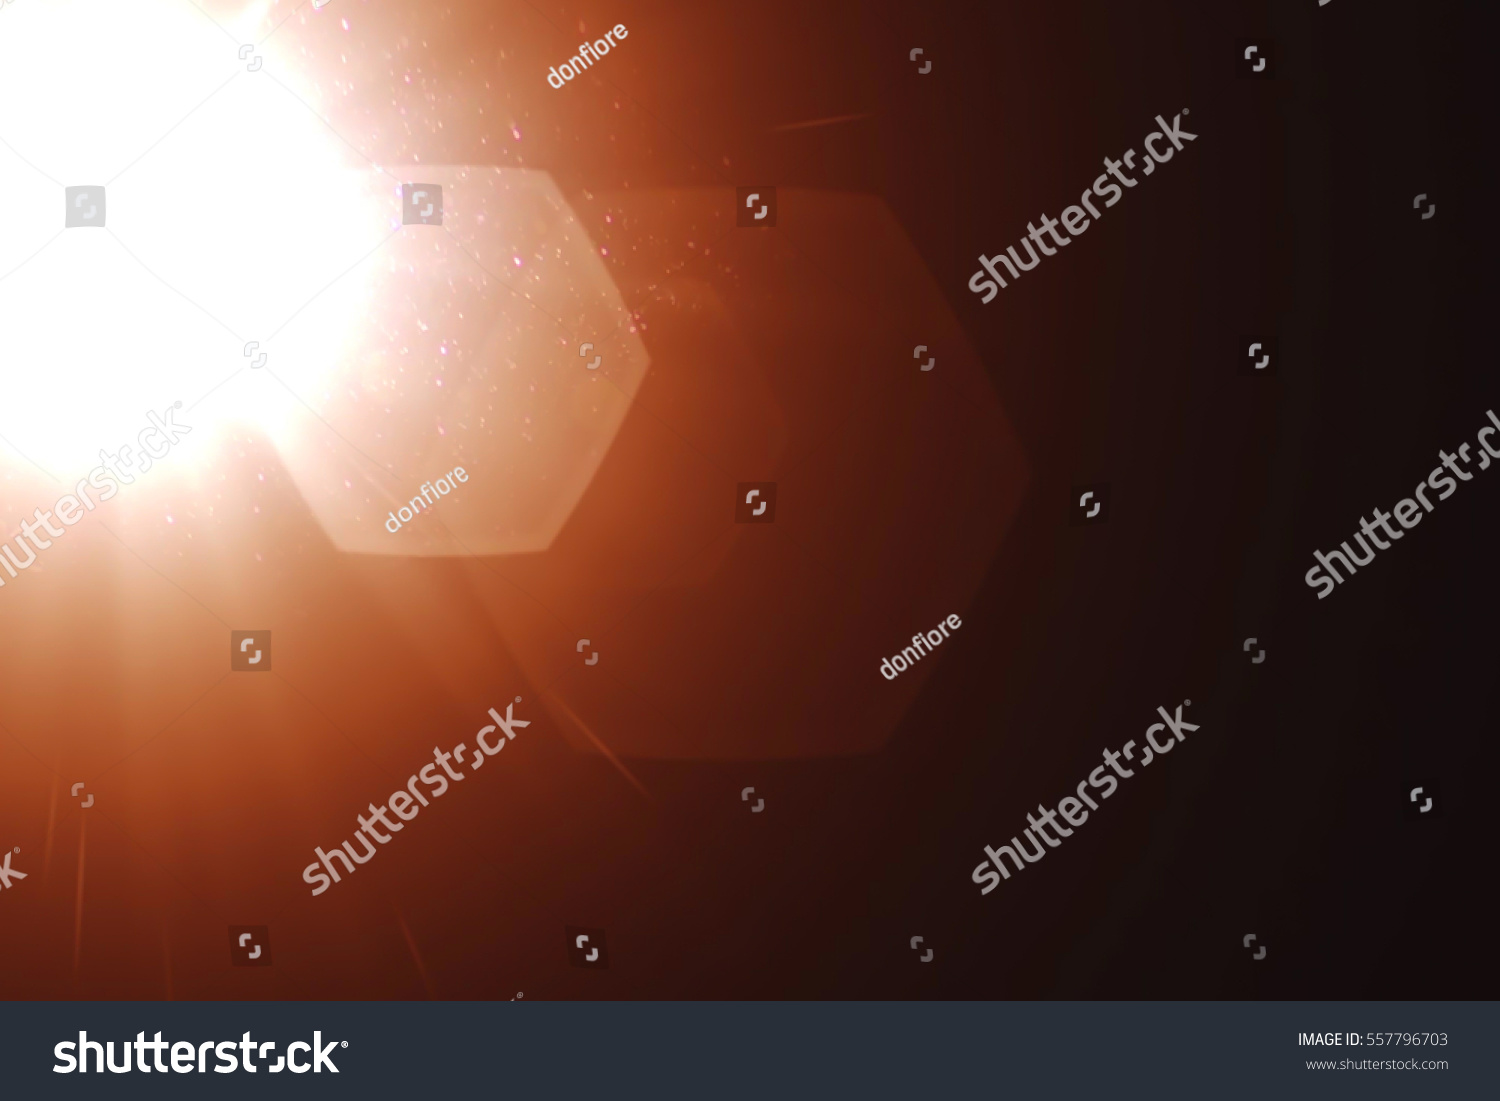 real light leaks and lens flare overlays, cool warm gold tint color effect #557796703